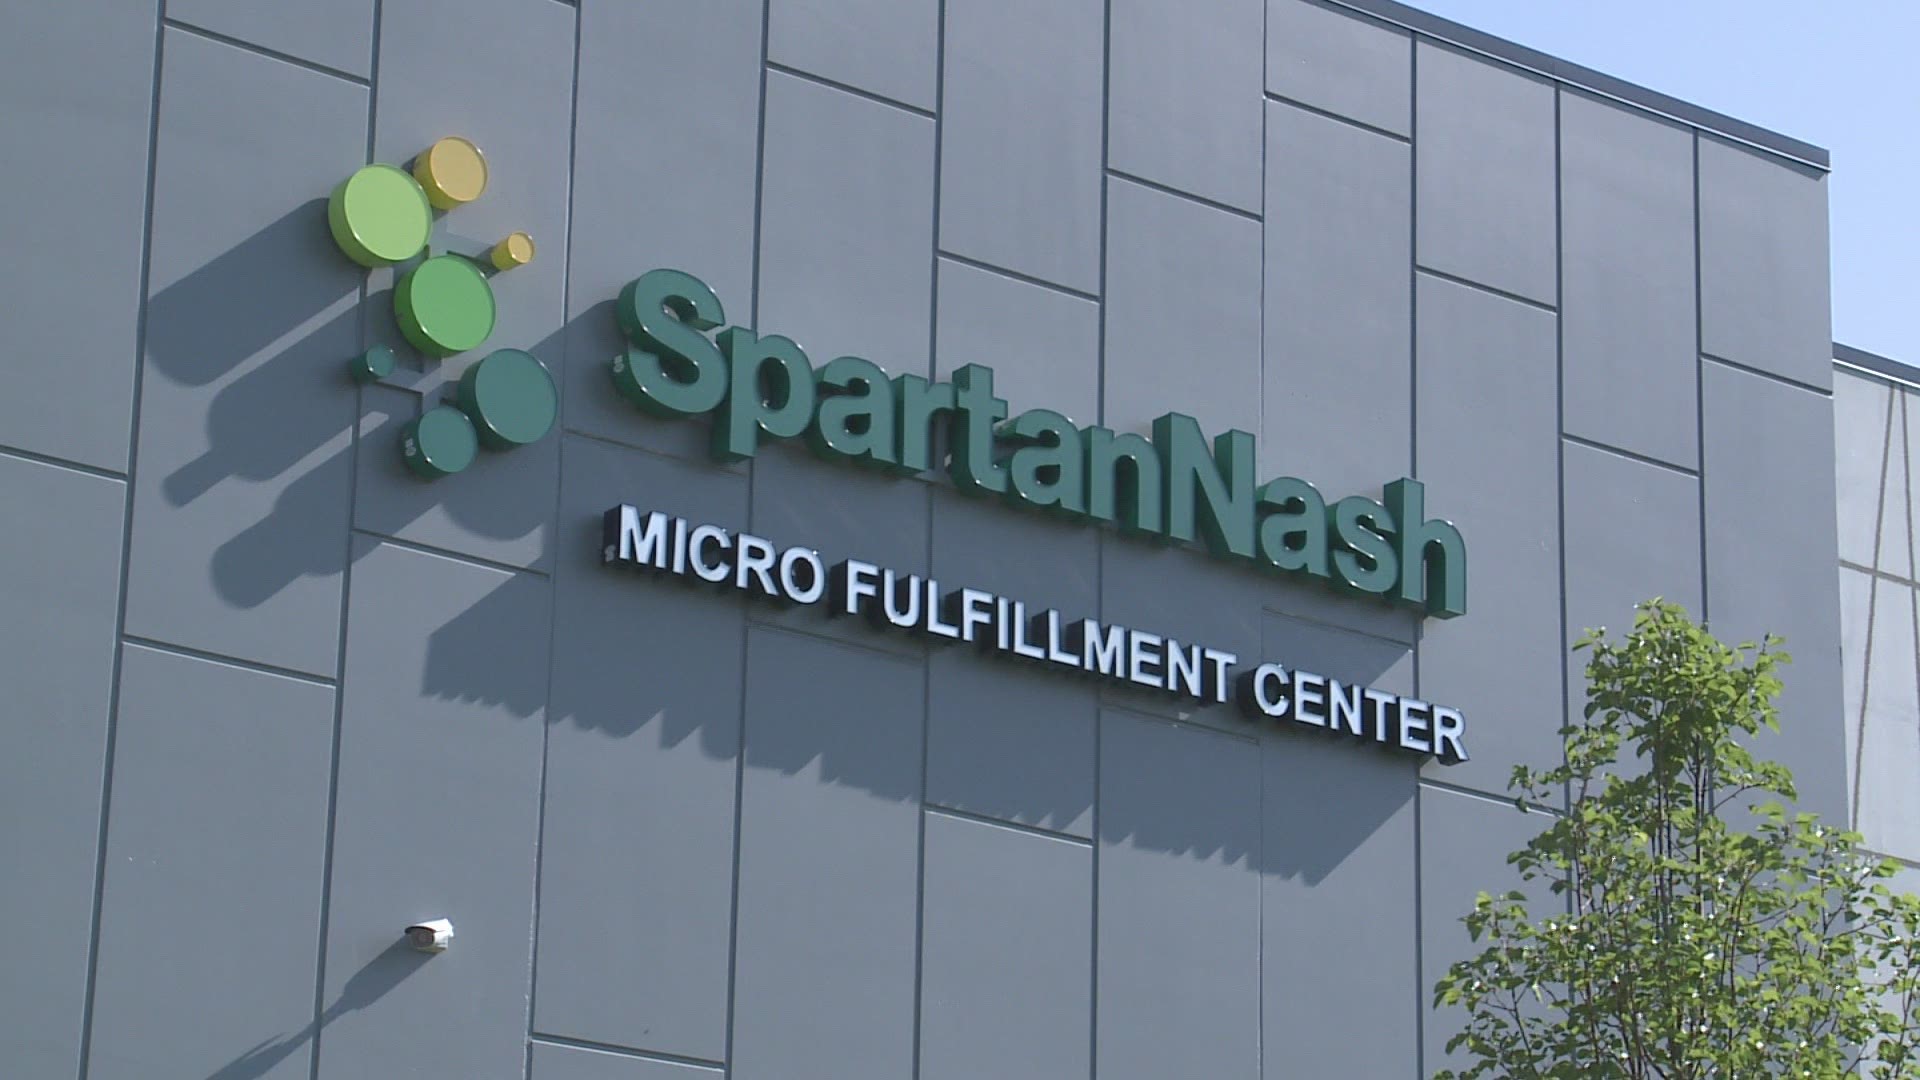 The SpartanNash facility will house over 16,000 items from 24 popular chains.